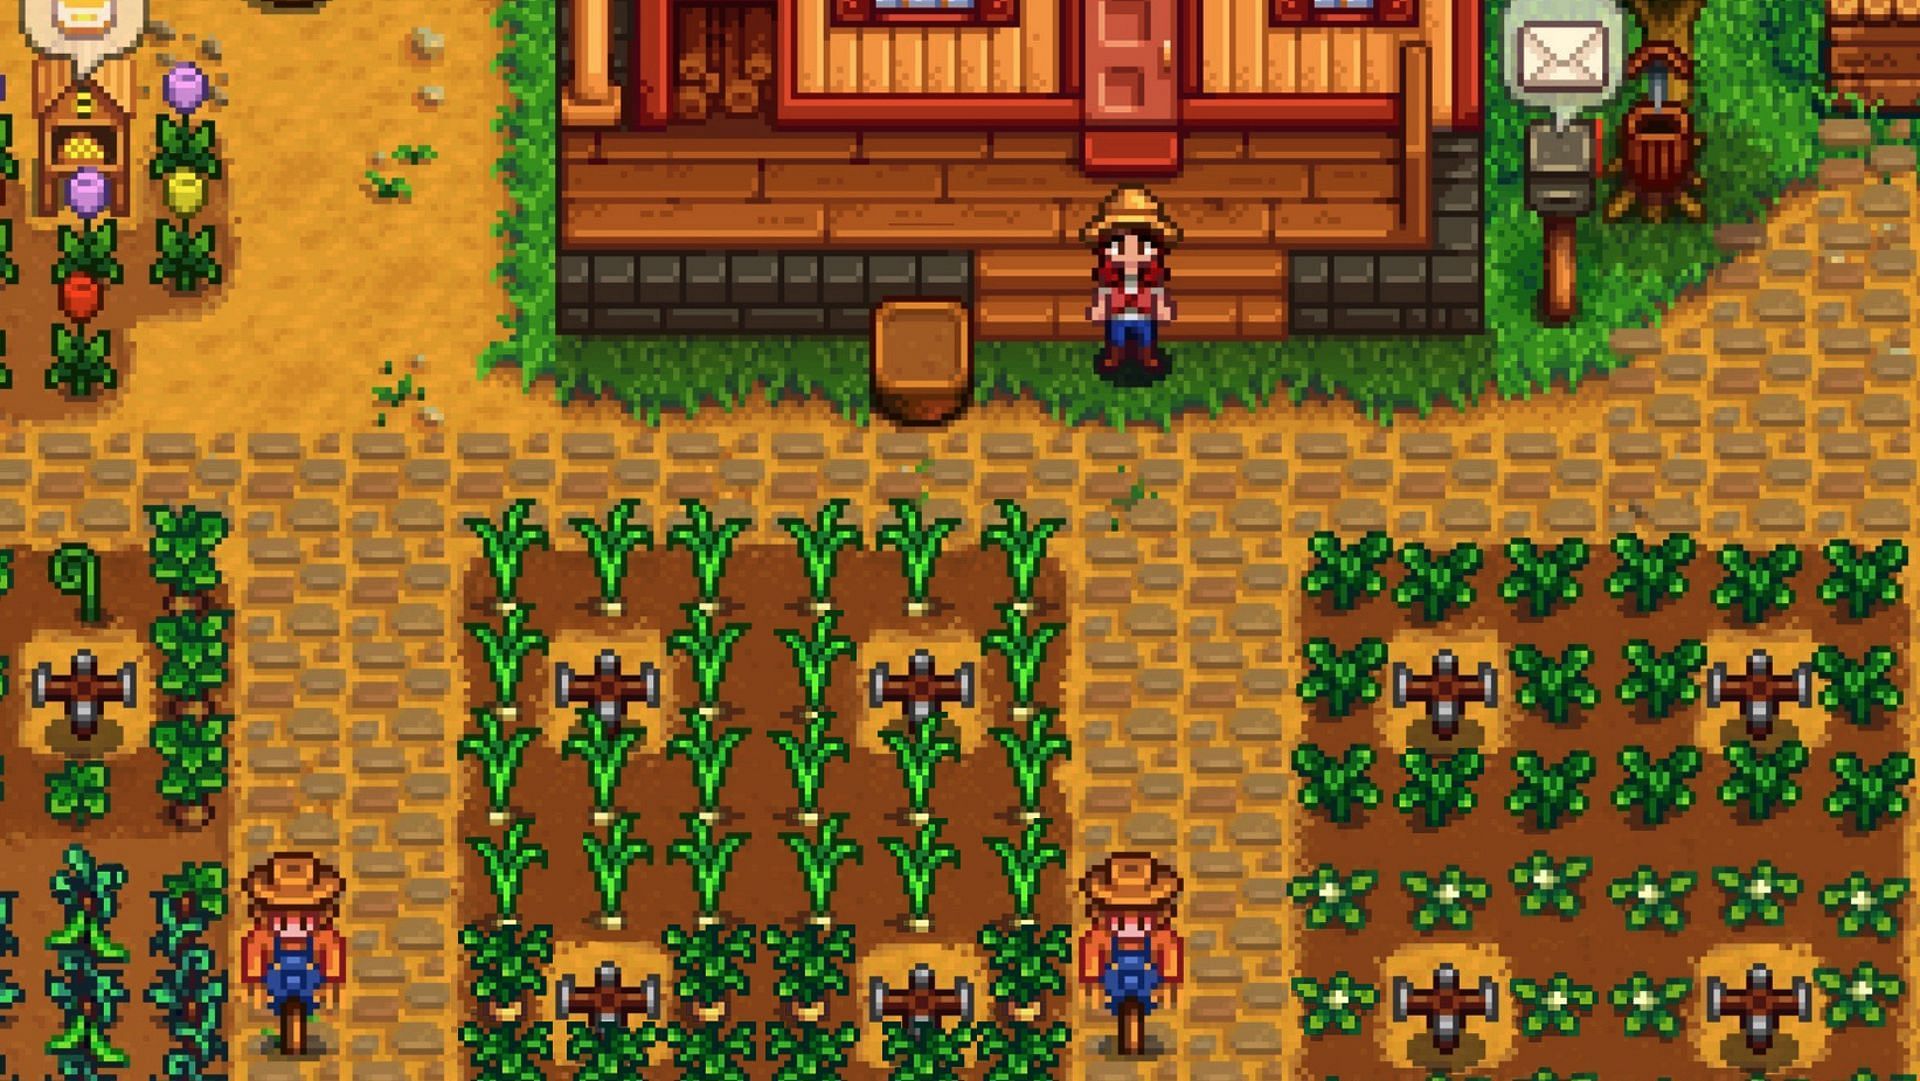 How to get and use Sprinklers in Stardew Valley 